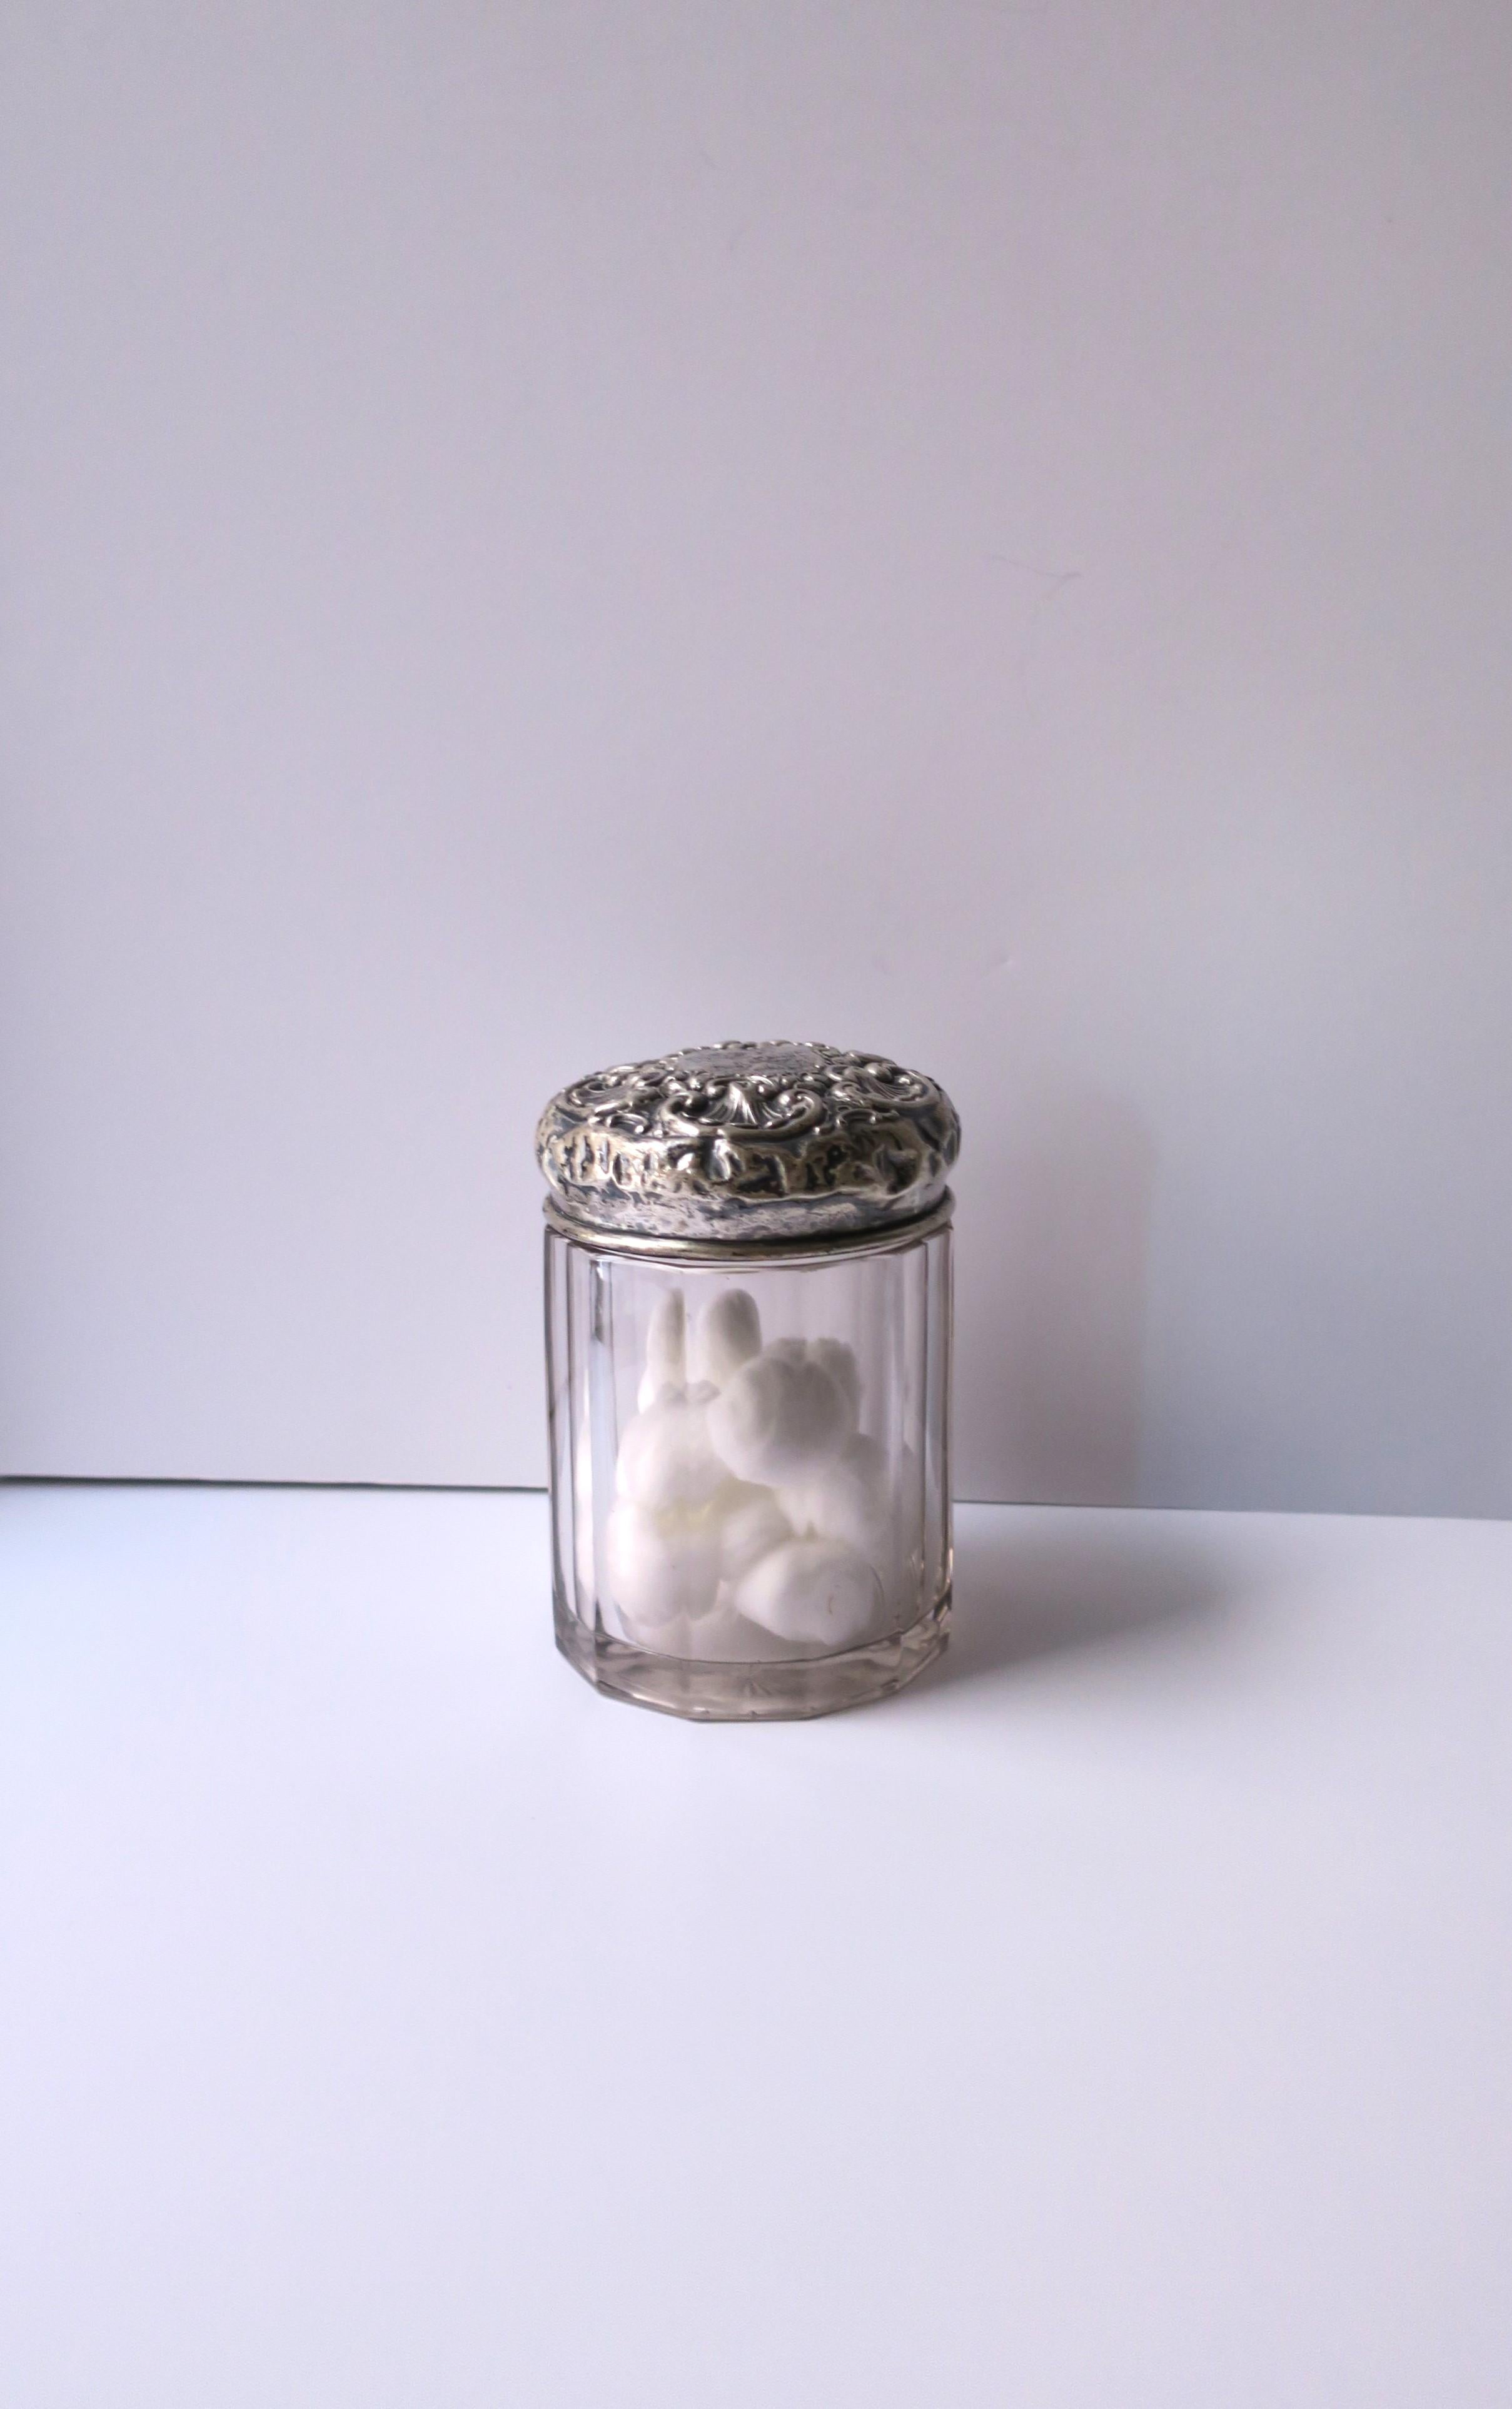 A sterling silver and crystal vanity or dresser jar, Victorian period, circa late 19th century. The sterling top/lid has a repose floral design around, a center monogram, a paneled shape body, and a cut starburst bottom. A great piece for a vanity